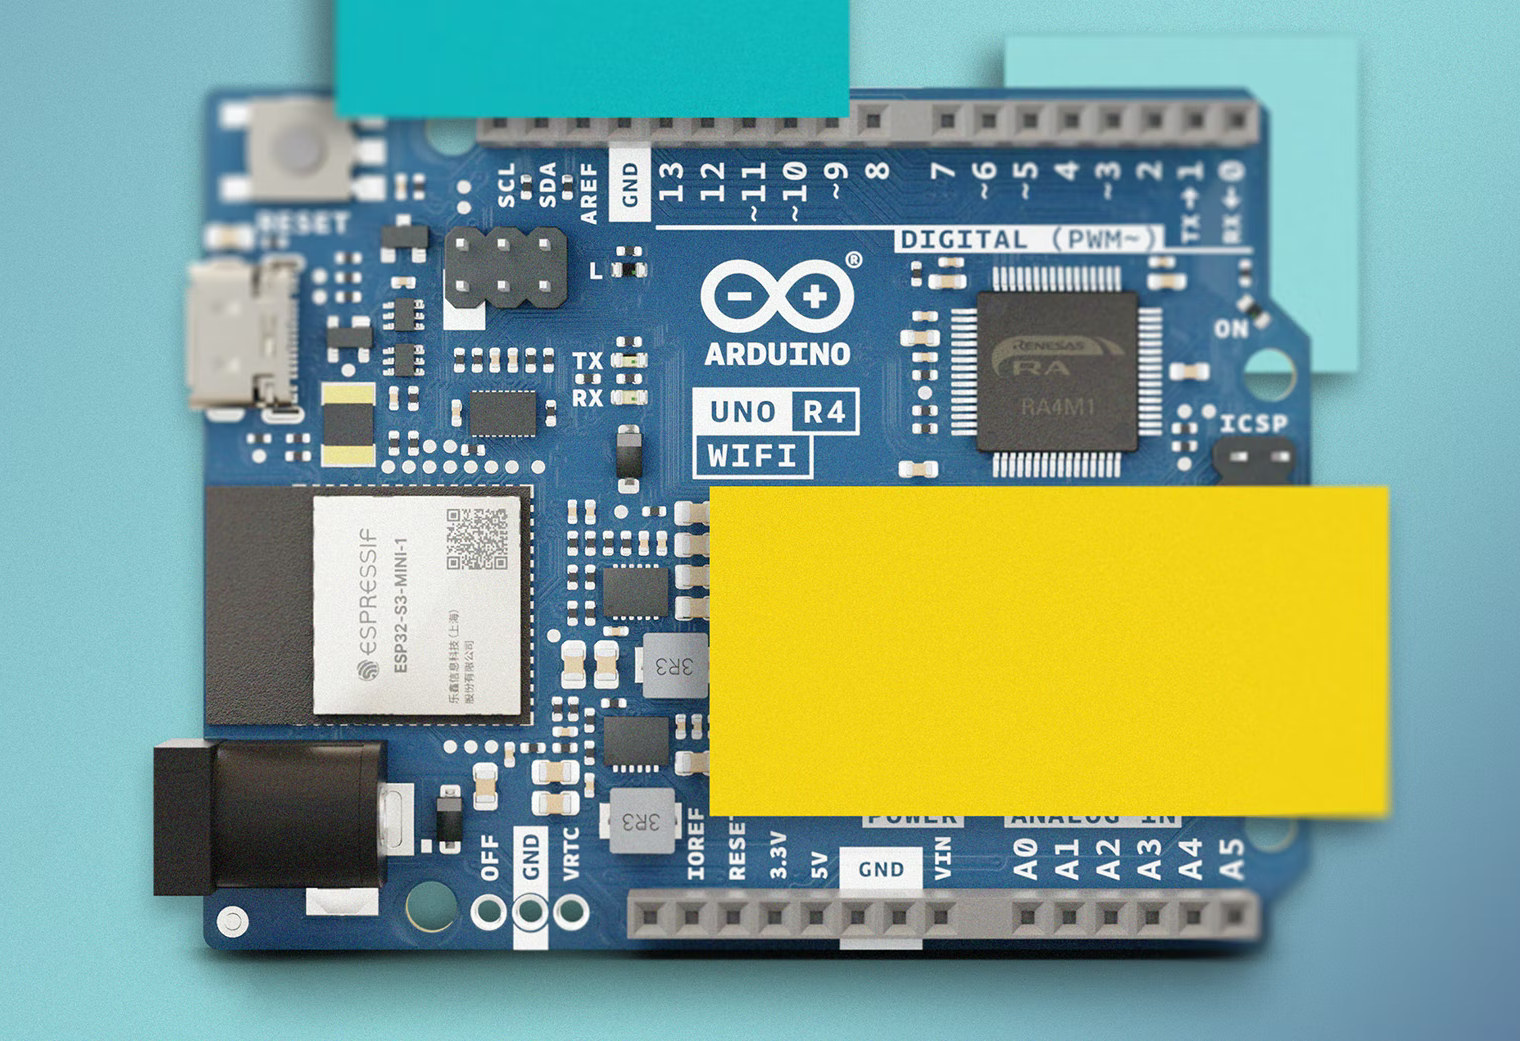 Arduino UNO R4 Renesas RA4M1 32-bit maker board offered with